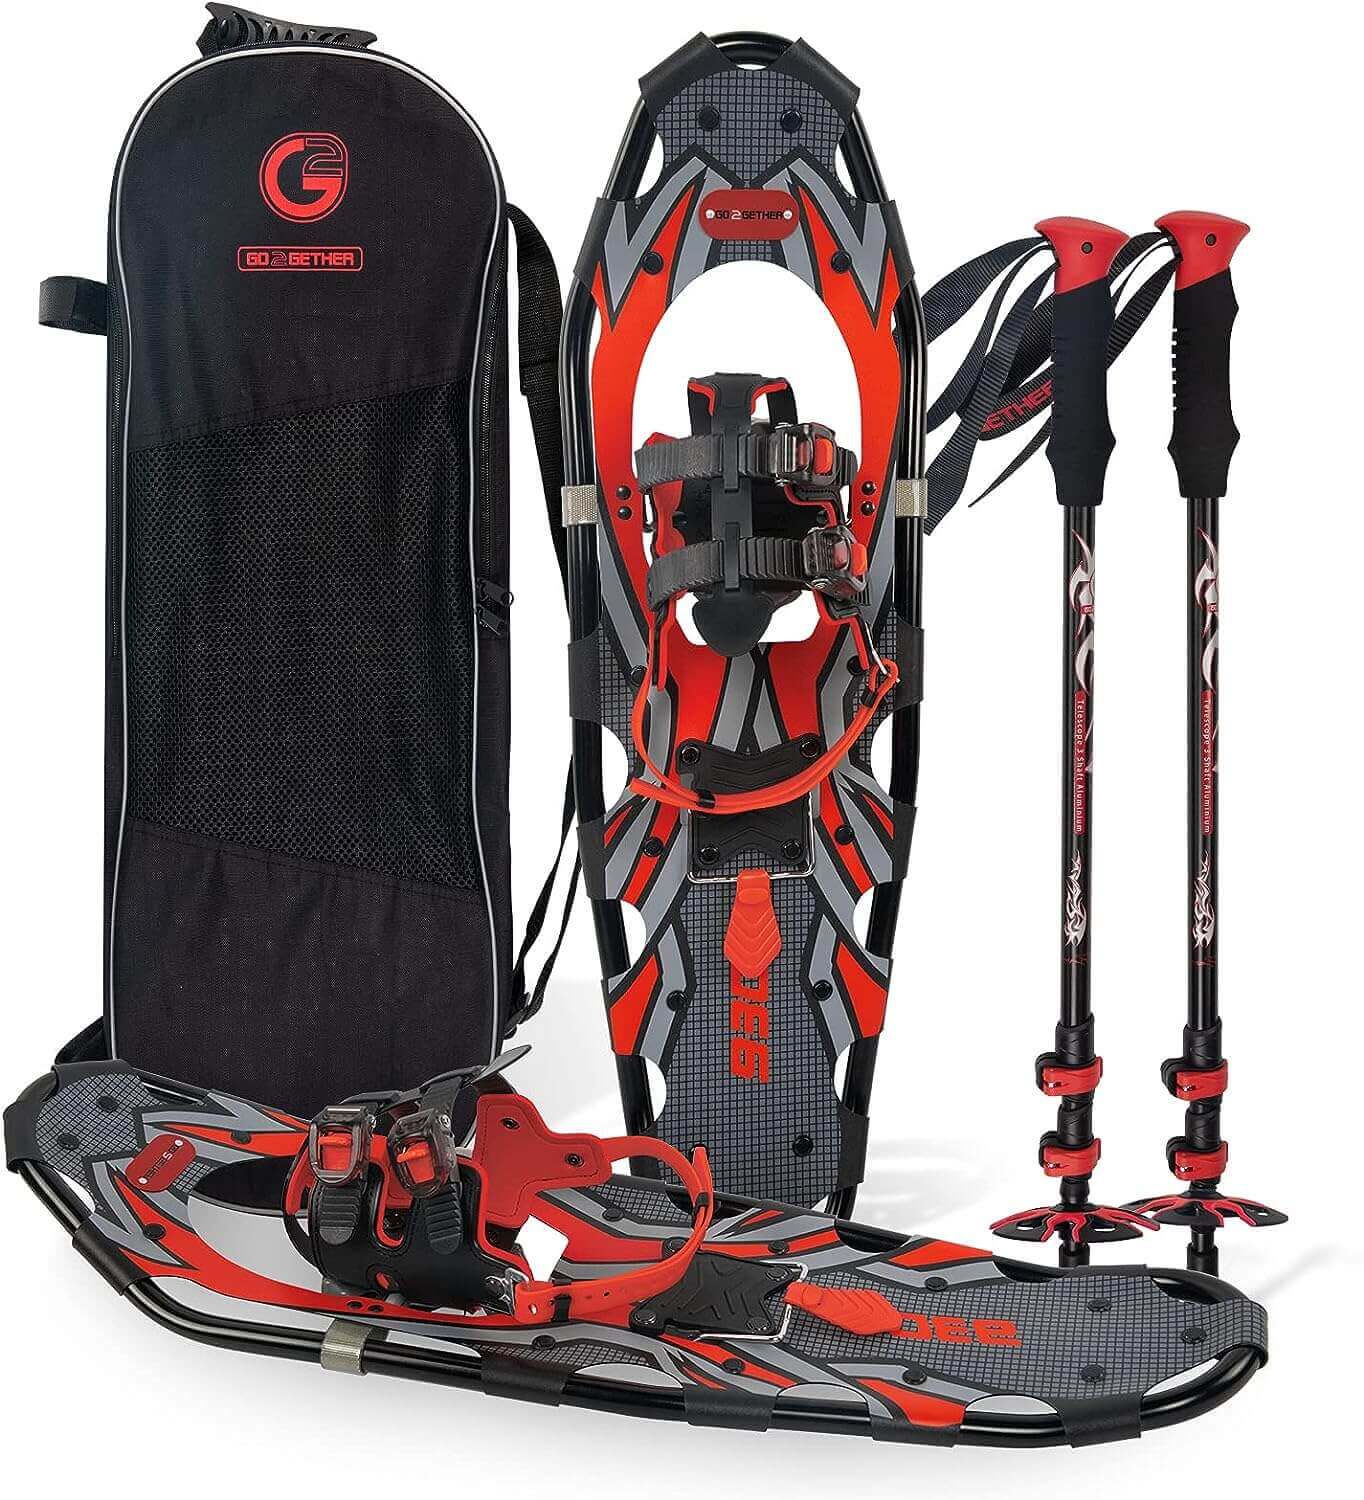 Shop The Latest >G2 Light Weight Snowshoes with Trekking Poles & Carrying Bag > *Only $134.99*> From The Top Brand > *G2 GO2GETHERl* > Shop Now and Get Free Shipping On Orders Over $45.00 >*Shop Earth Foot*